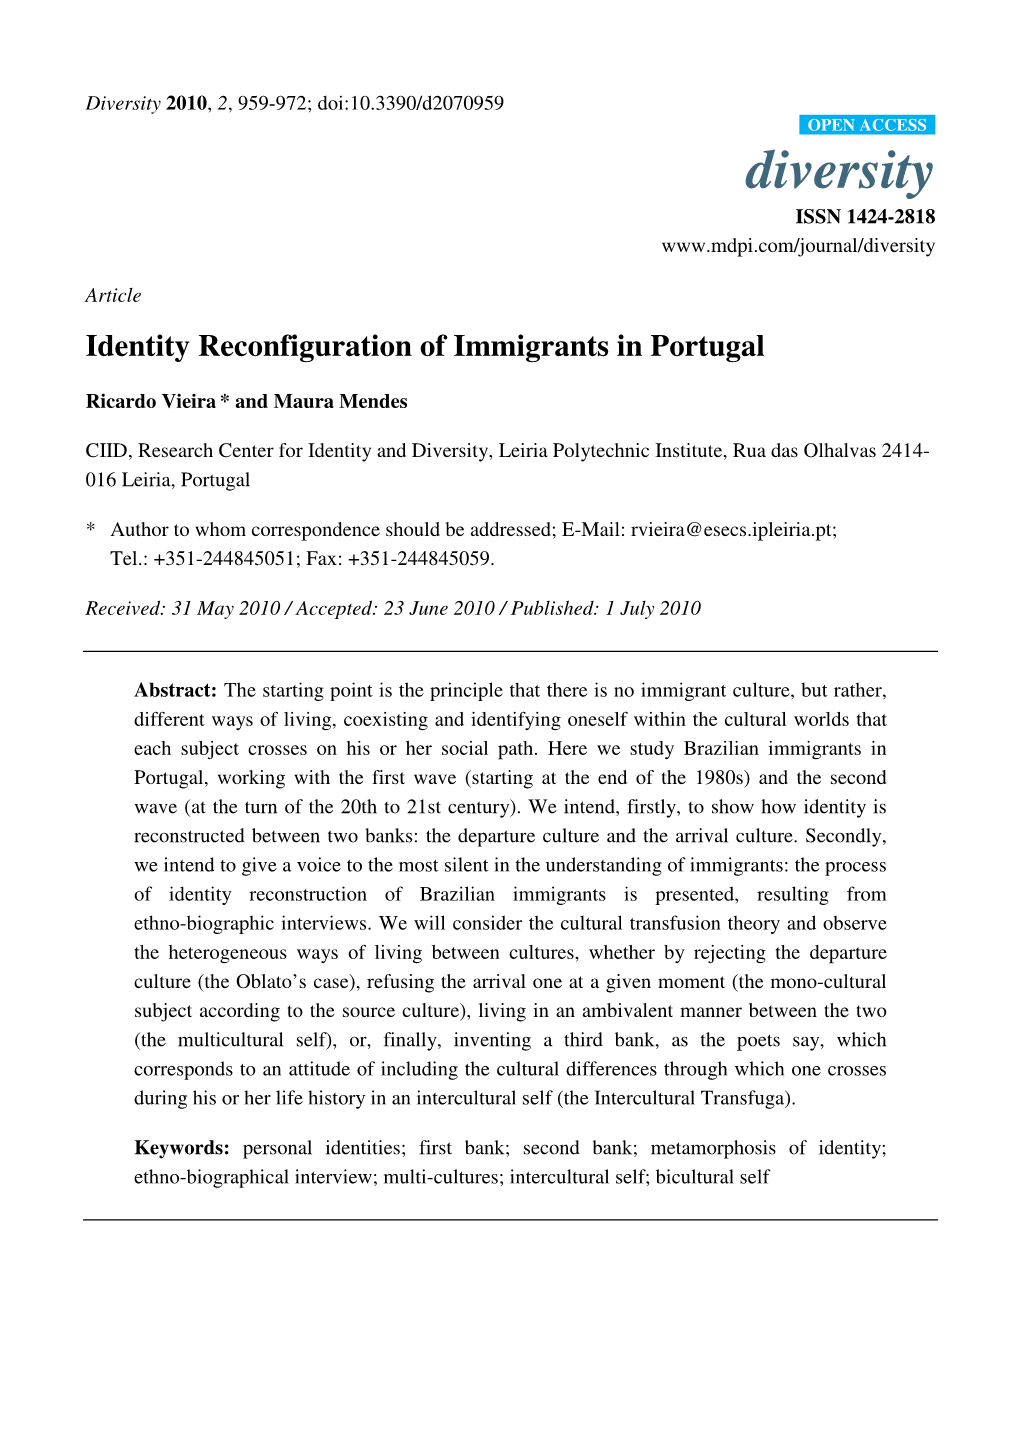 Identity Reconfiguration of Immigrants in Portugal